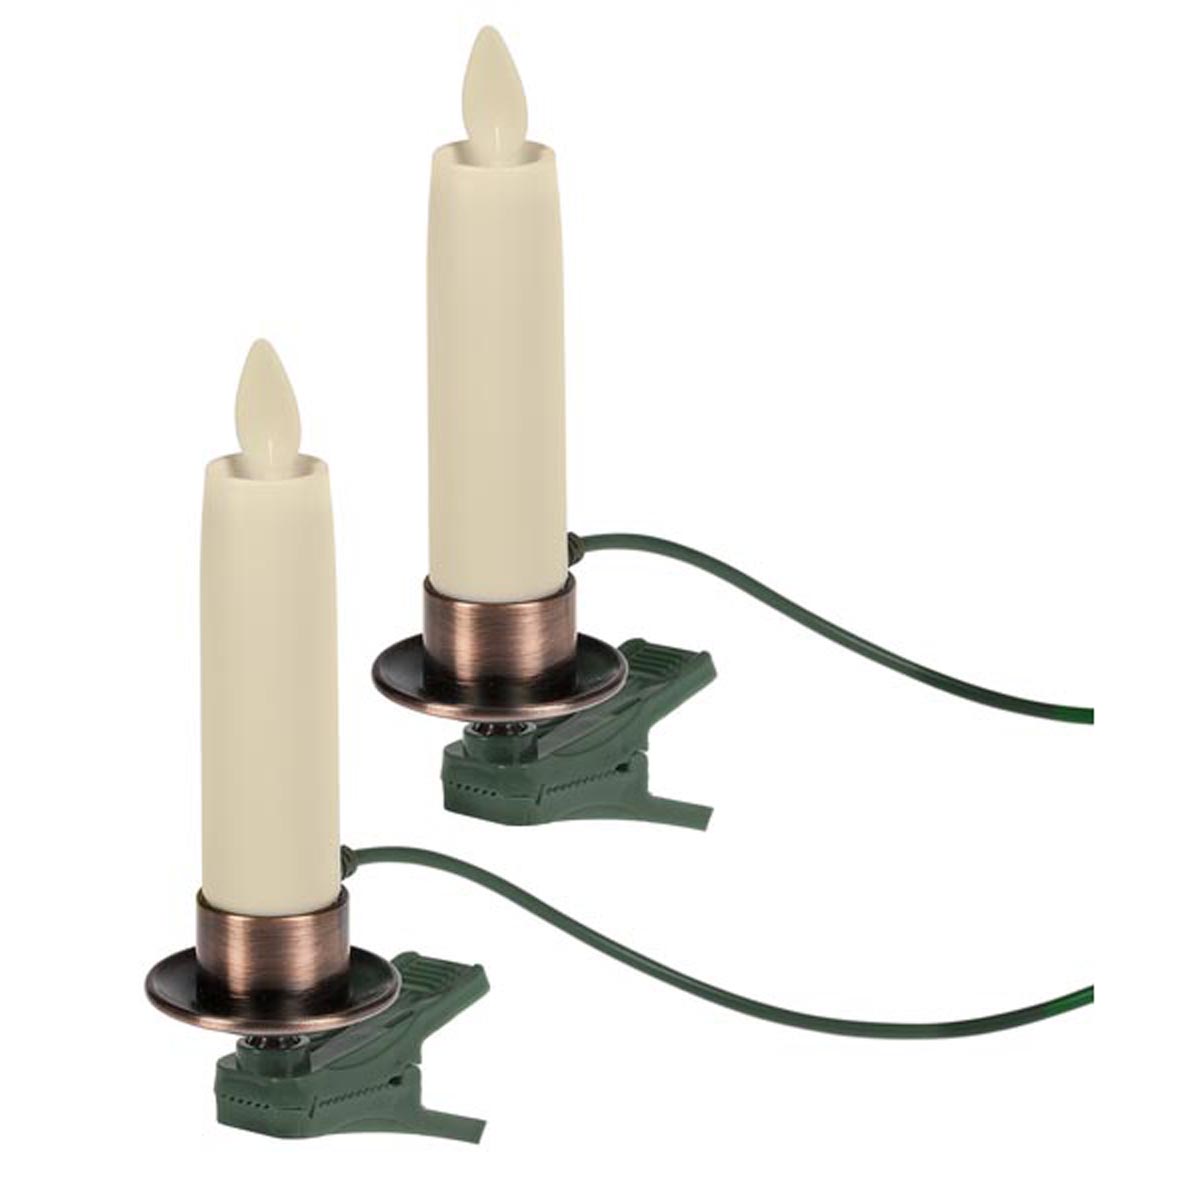 LED Clip Taper Additional Ornaments w/ Connecting Cord (2 pc. set)